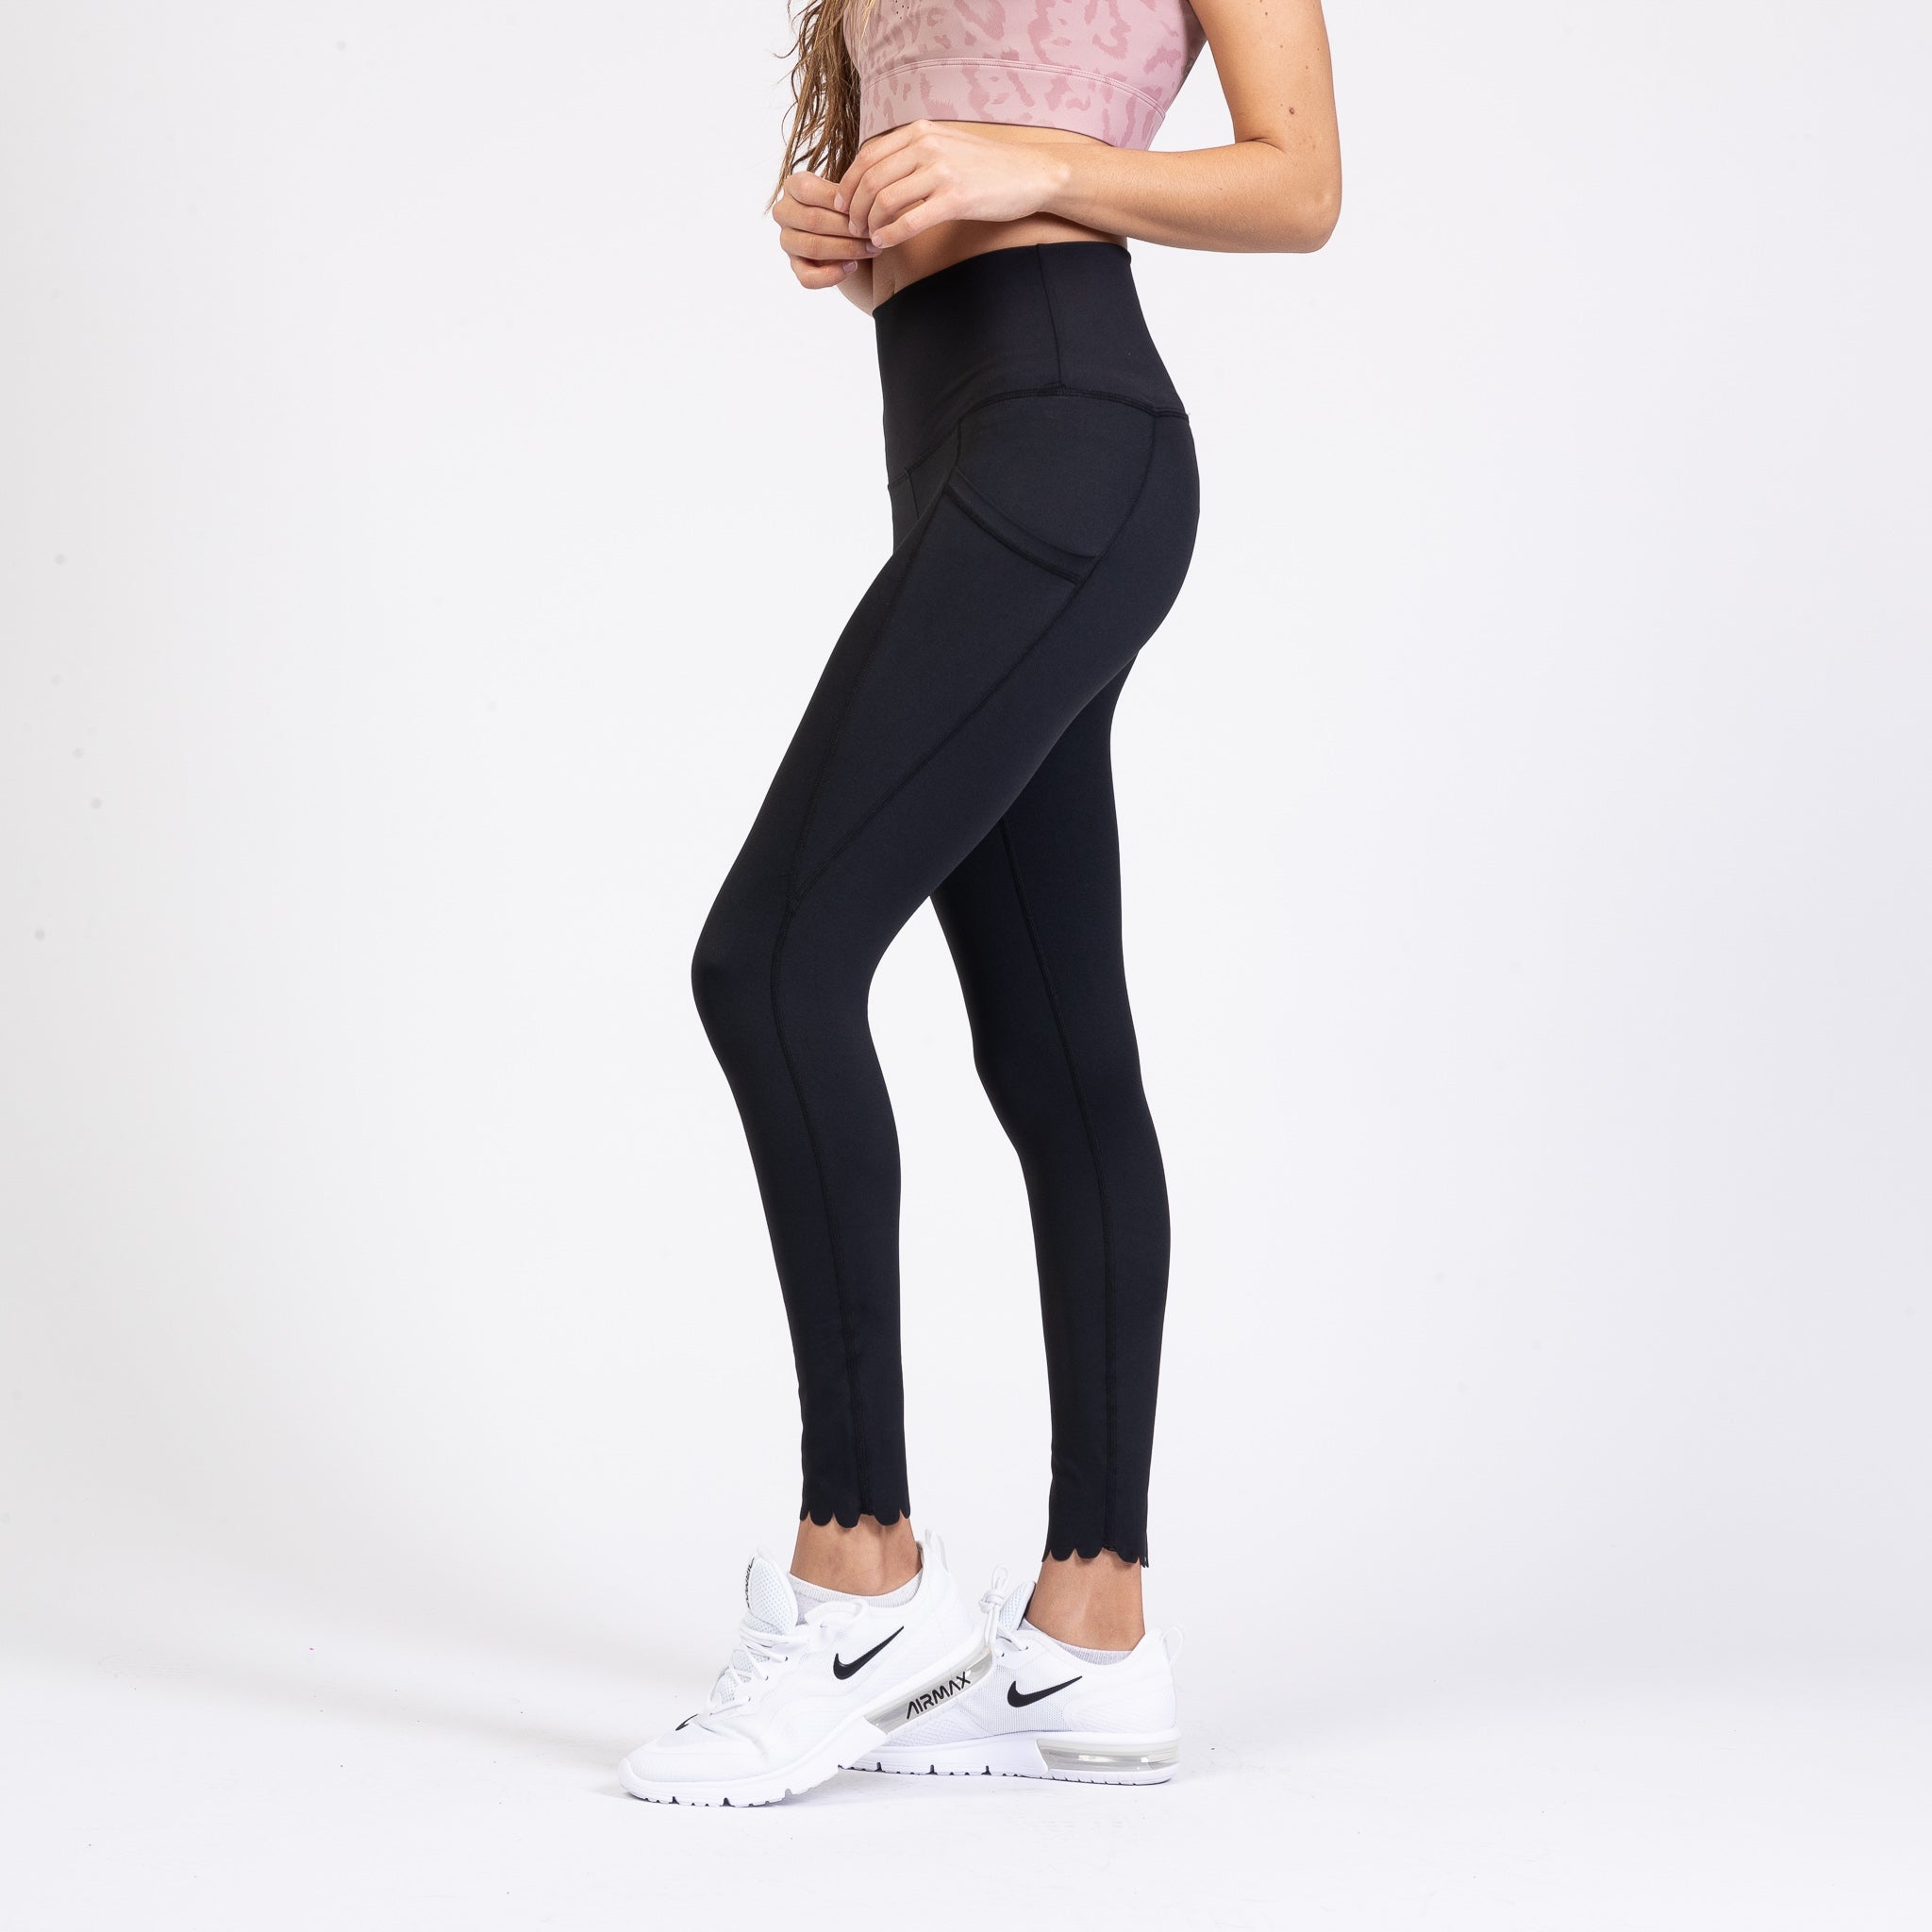 These leggings have so much tummy control, perfect for postpartum